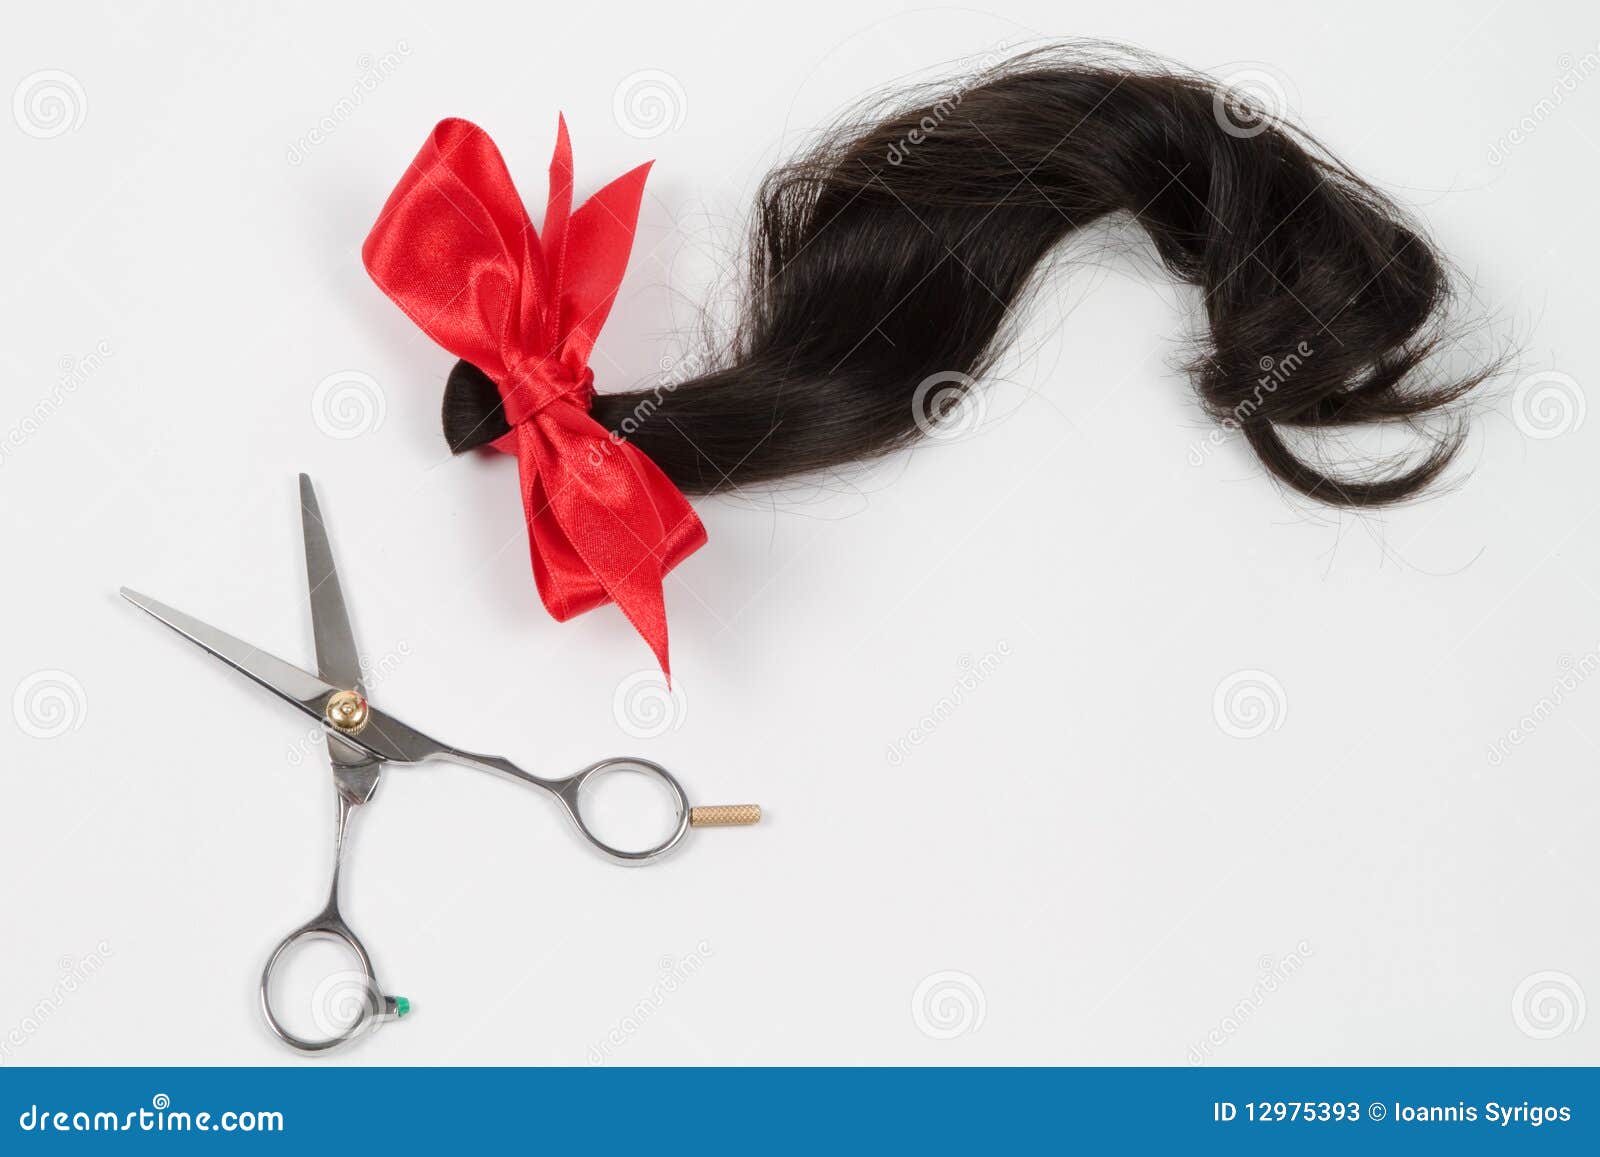 Brown Hair In Ponytail Cut With Scissors Stock Image 